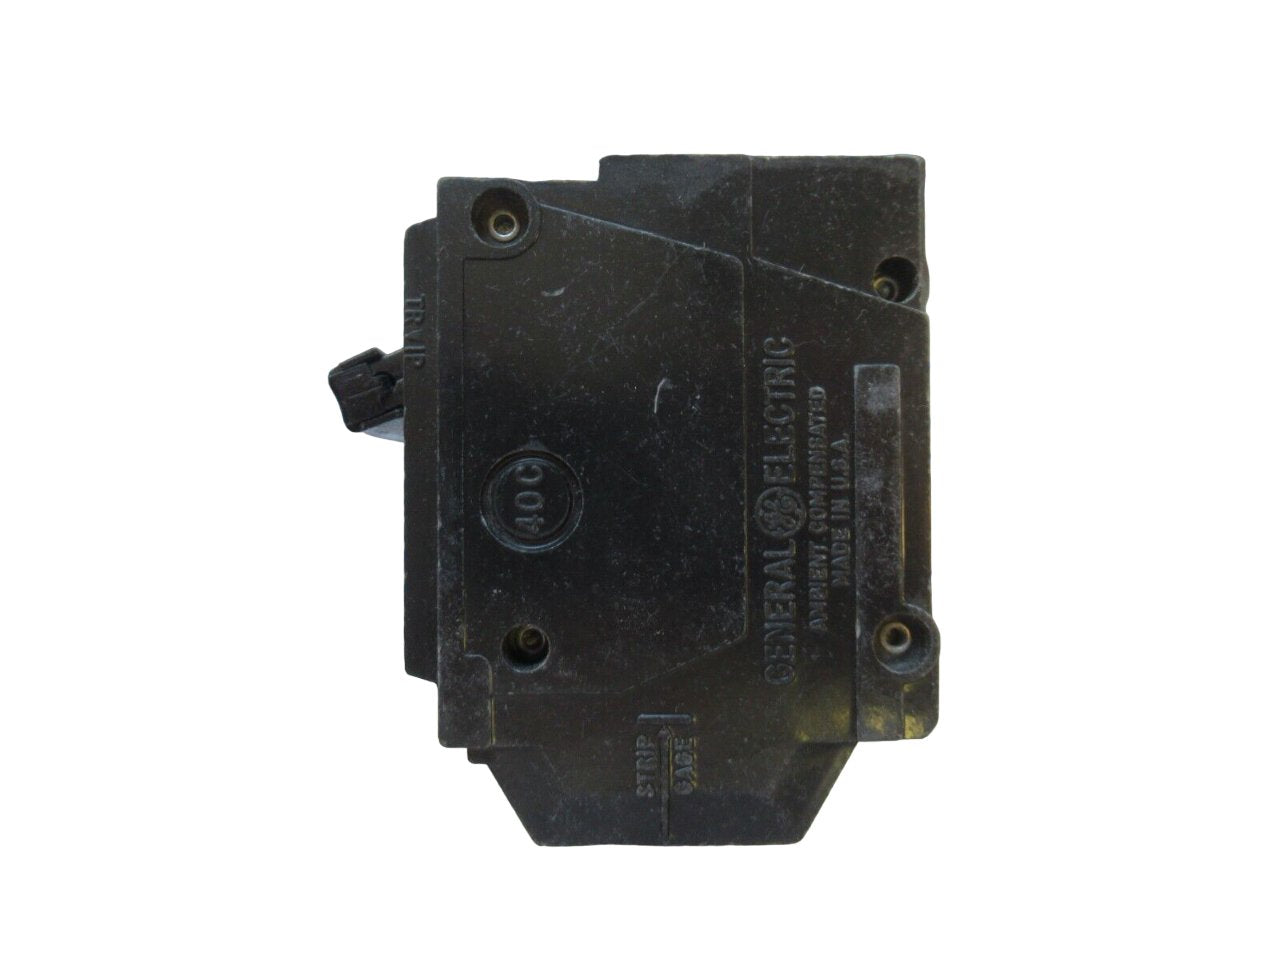 THHQL32015 - General Electrics - Molded Case Circuit Breakers